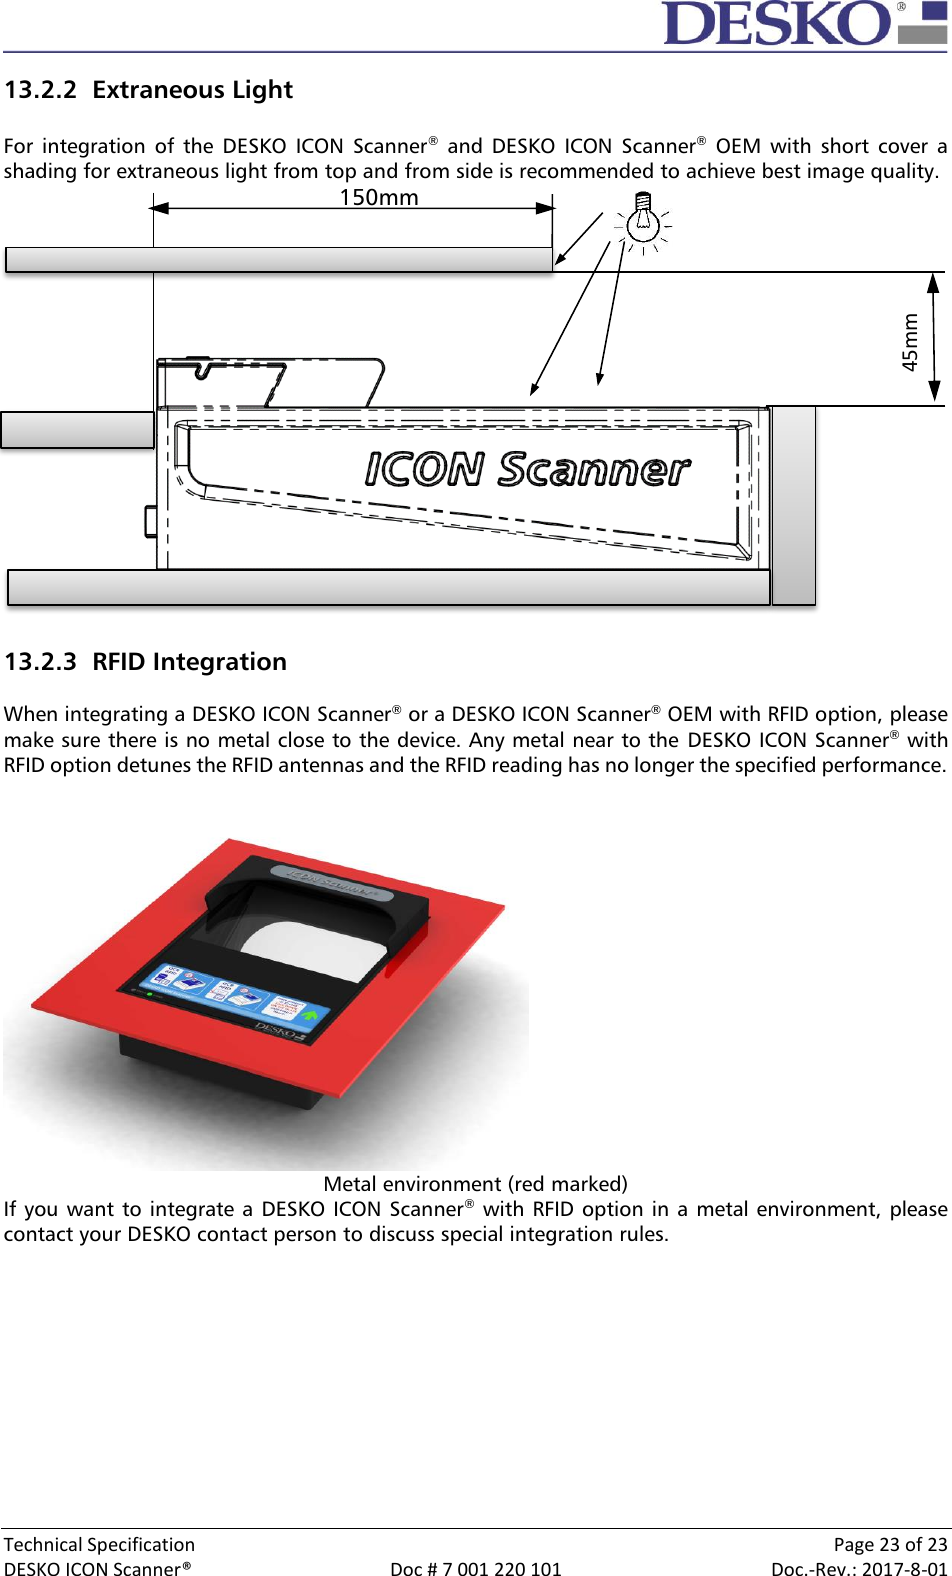  Technical Specification    Page 23 of 23 DESKO ICON Scanner®  Doc # 7 001 220 101  Doc.-Rev.: 2017-8-01  13.2.2 Extraneous Light  For  integration  of  the  DESKO  ICON  Scanner®  and  DESKO  ICON  Scanner®  OEM  with  short  cover  a shading for extraneous light from top and from side is recommended to achieve best image quality.                                                    150mm                13.2.3 RFID Integration  When integrating a DESKO ICON Scanner® or a DESKO ICON Scanner® OEM with RFID option, please make sure there is no metal close to the device. Any metal near to the  DESKO ICON Scanner® with RFID option detunes the RFID antennas and the RFID reading has no longer the specified performance.  Metal environment (red marked) If you want to integrate a DESKO ICON Scanner® with RFID option in a metal environment, please contact your DESKO contact person to discuss special integration rules. 45mm 